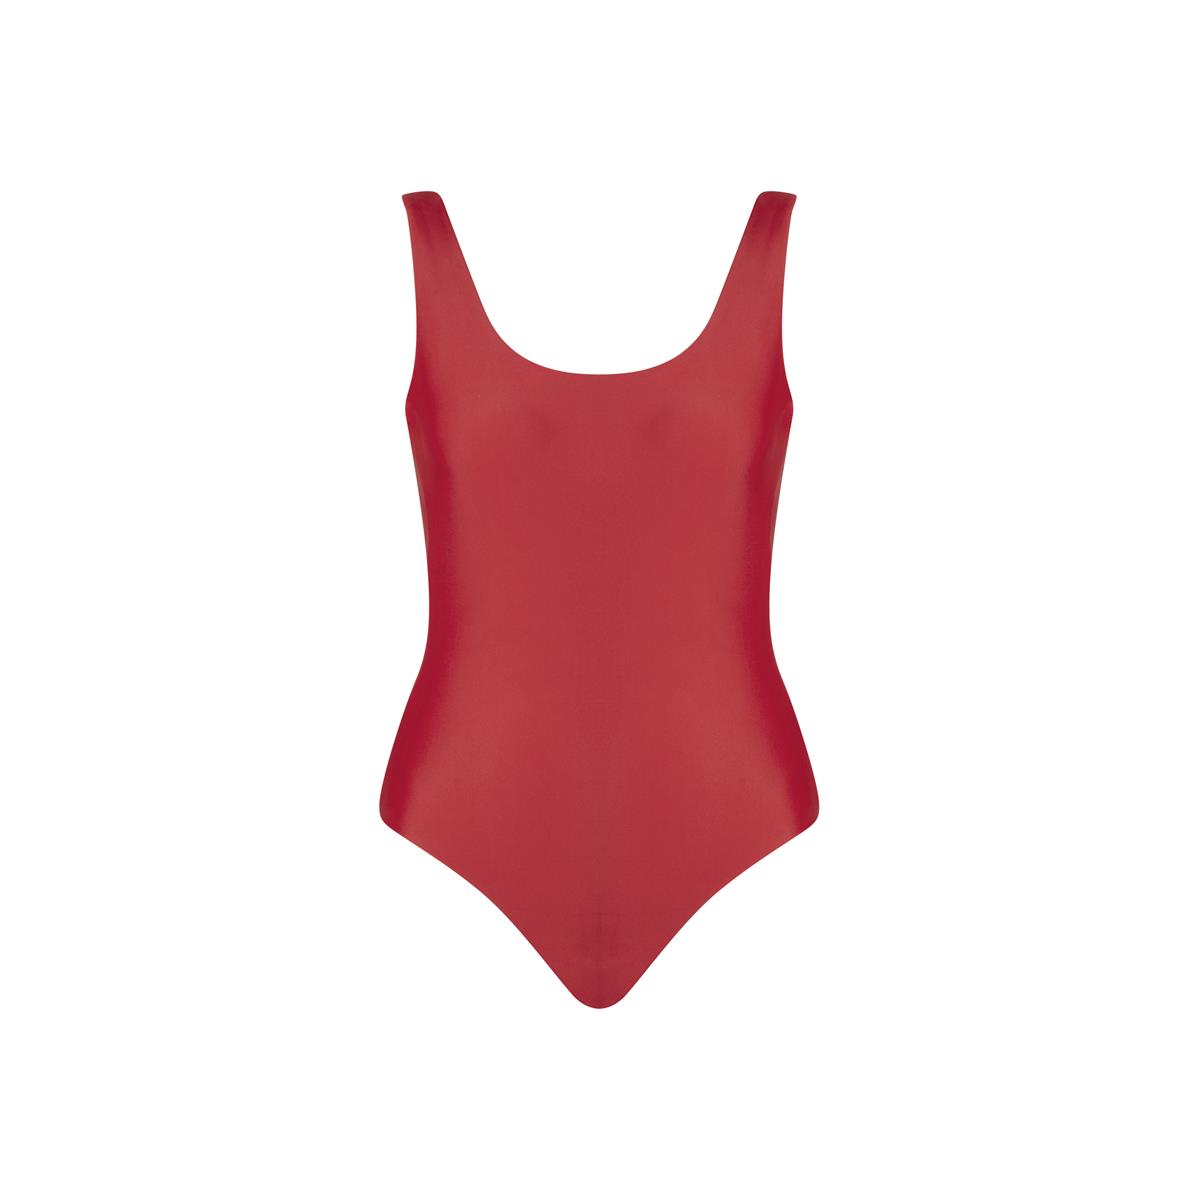 MARGARET AND HERMIONE_SS19_Swimsuit No.5_dark red_EUR 159,00